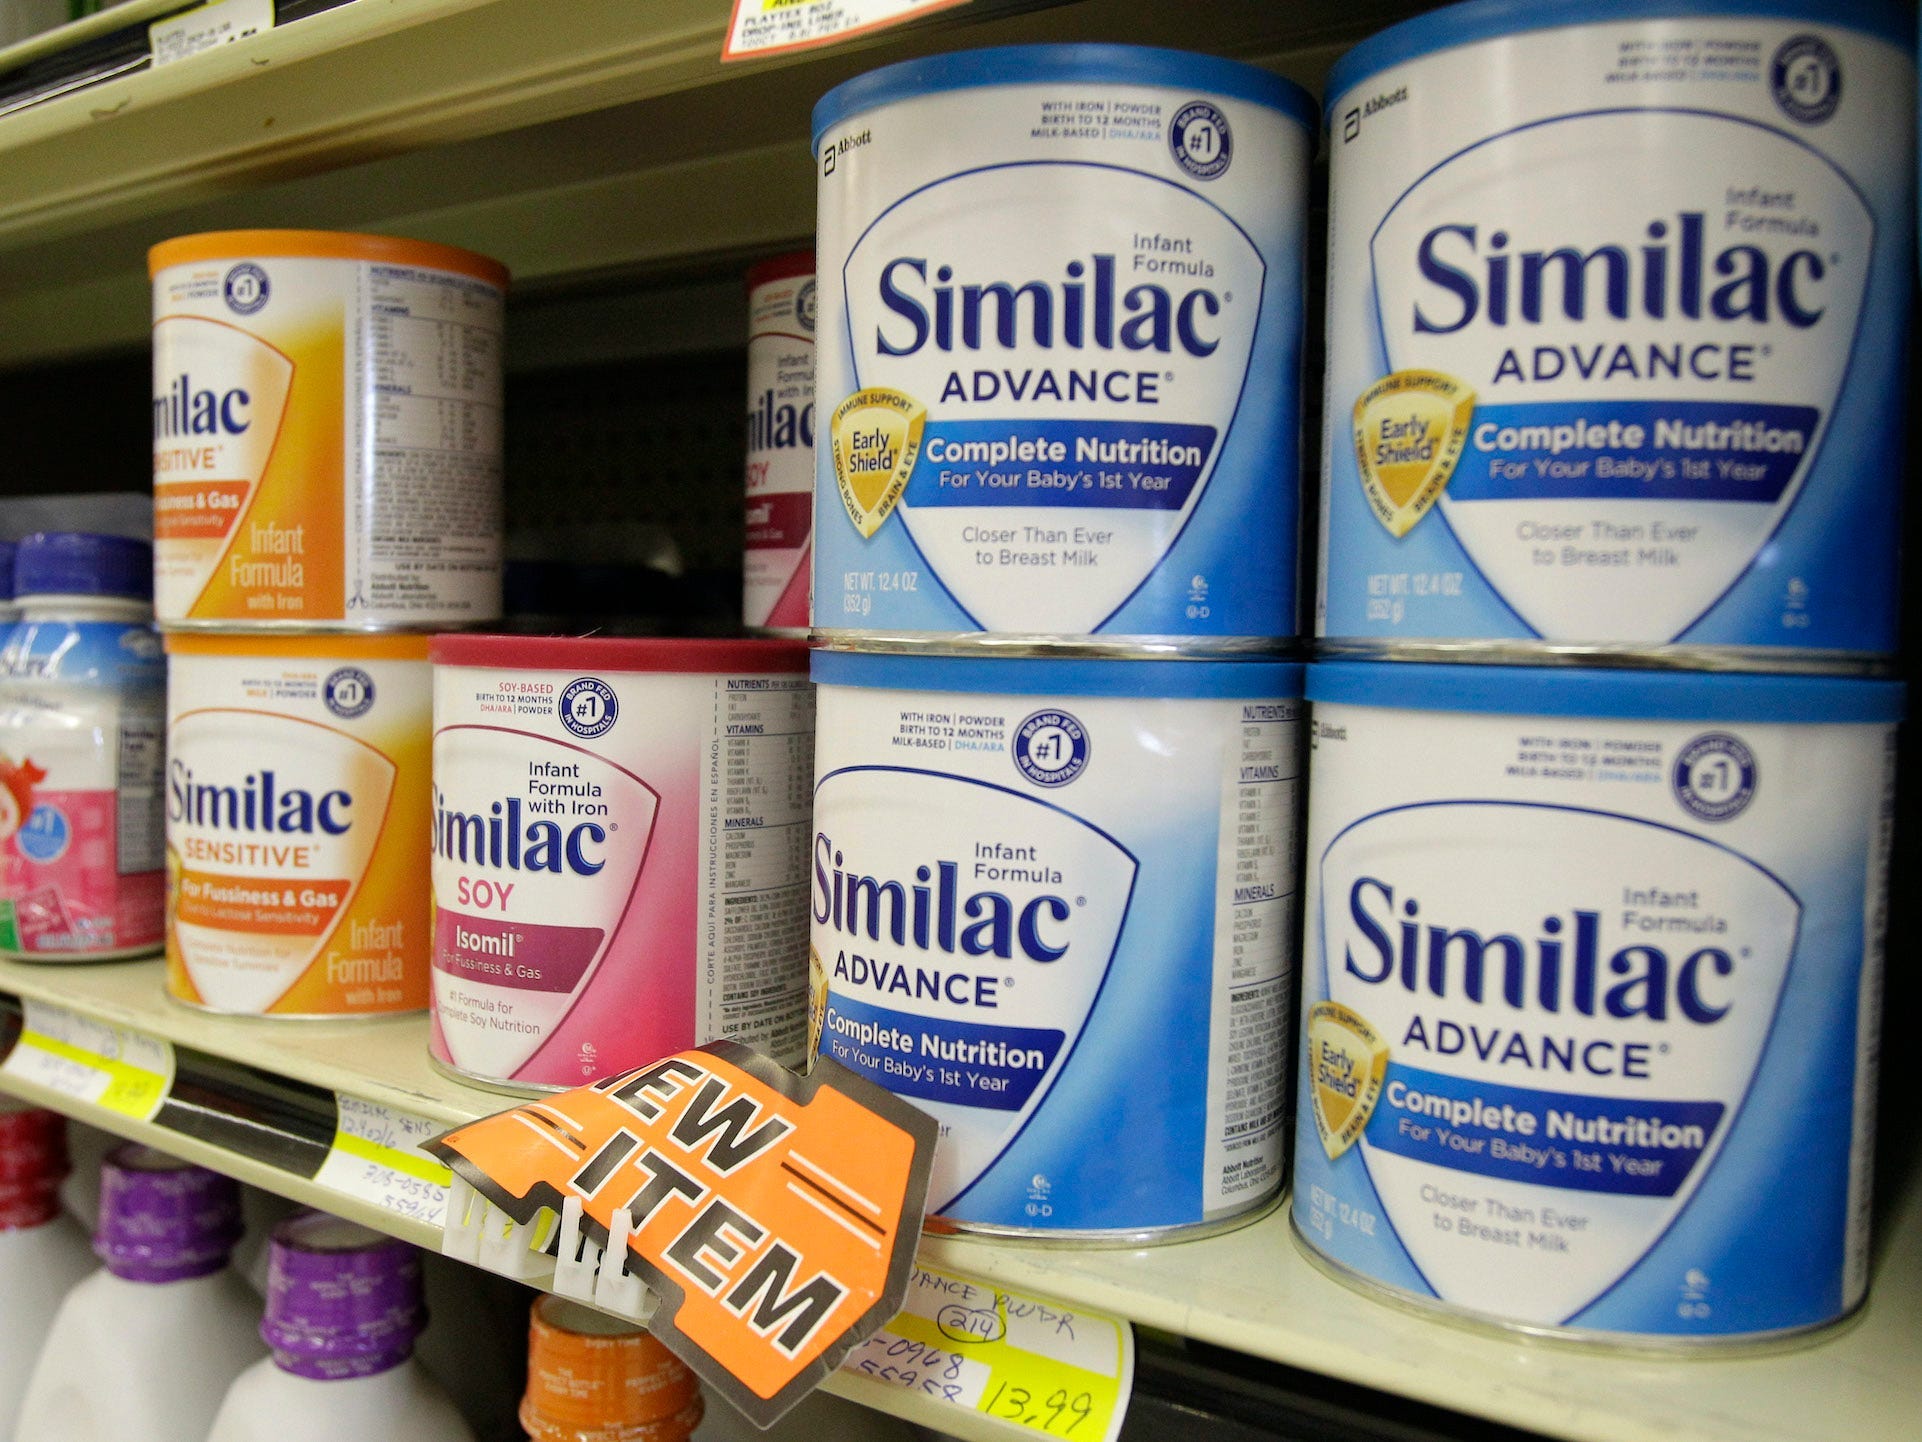 Similac baby formula is displayed on the shelves at Shaker's IGA in Olmsted Falls, Ohio.